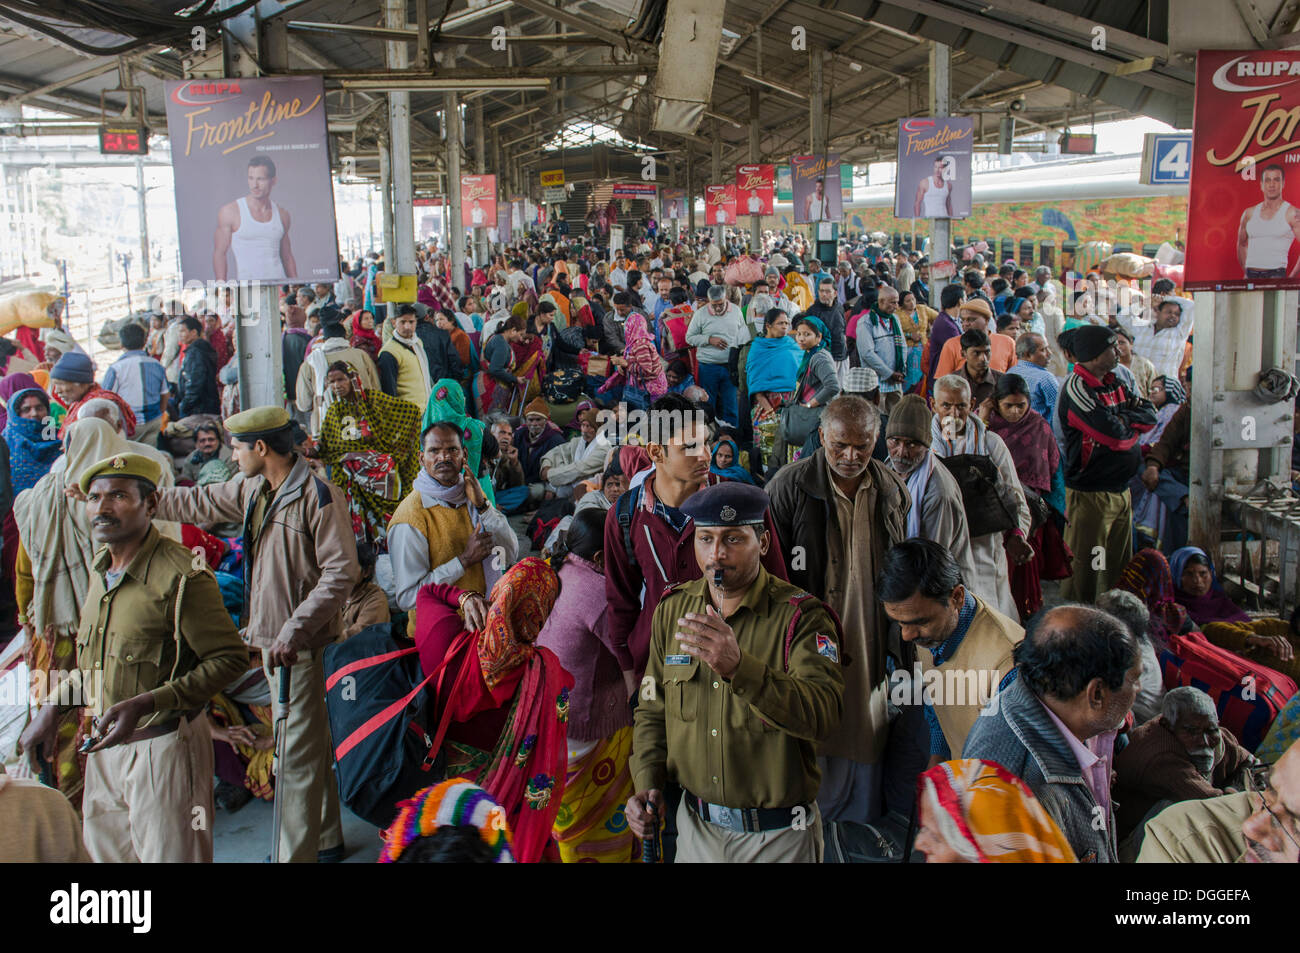 Crowds of people waiting for delayed trains on a platform of the railway station, Allahabad, Uttar Pradesh, India Stock Photo